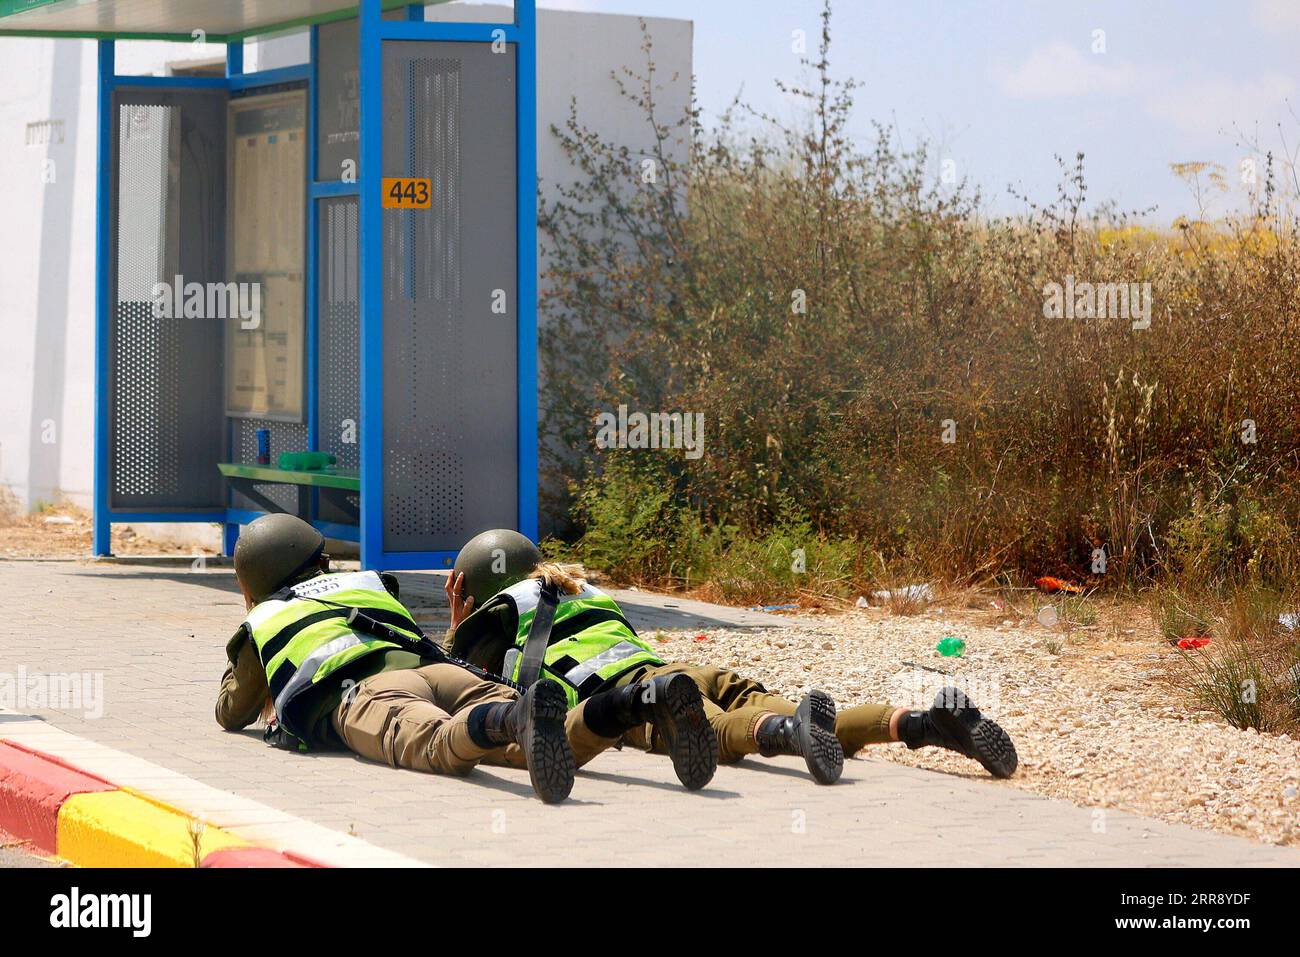 210520 -- ASHKELON ISRAEL, May 20, 2021 -- People take cover as a siren warning of incoming rockets fired from the Gaza Strip sounds in Ashkelon, southern Israel, on May 20, 2021. Both Israel and Hamas, which rules the Gaza Strip, have accepted an Egyptian-brokered deal to cease fighting at 2 a.m. Friday local time 2300 GMT Thursday to end the 11-day bloodshed. The heaviest fighting between Israel and Gaza militants since 2014 has so far killed 232 Palestinians, including 65 children and 39 women, and 12 Israelis.  via Xinhua ISRAEL-ASHKELON-ROCKET-ATTACK IlanxAssayag/JINI PUBLICATIONxNOTxINxC Stock Photo